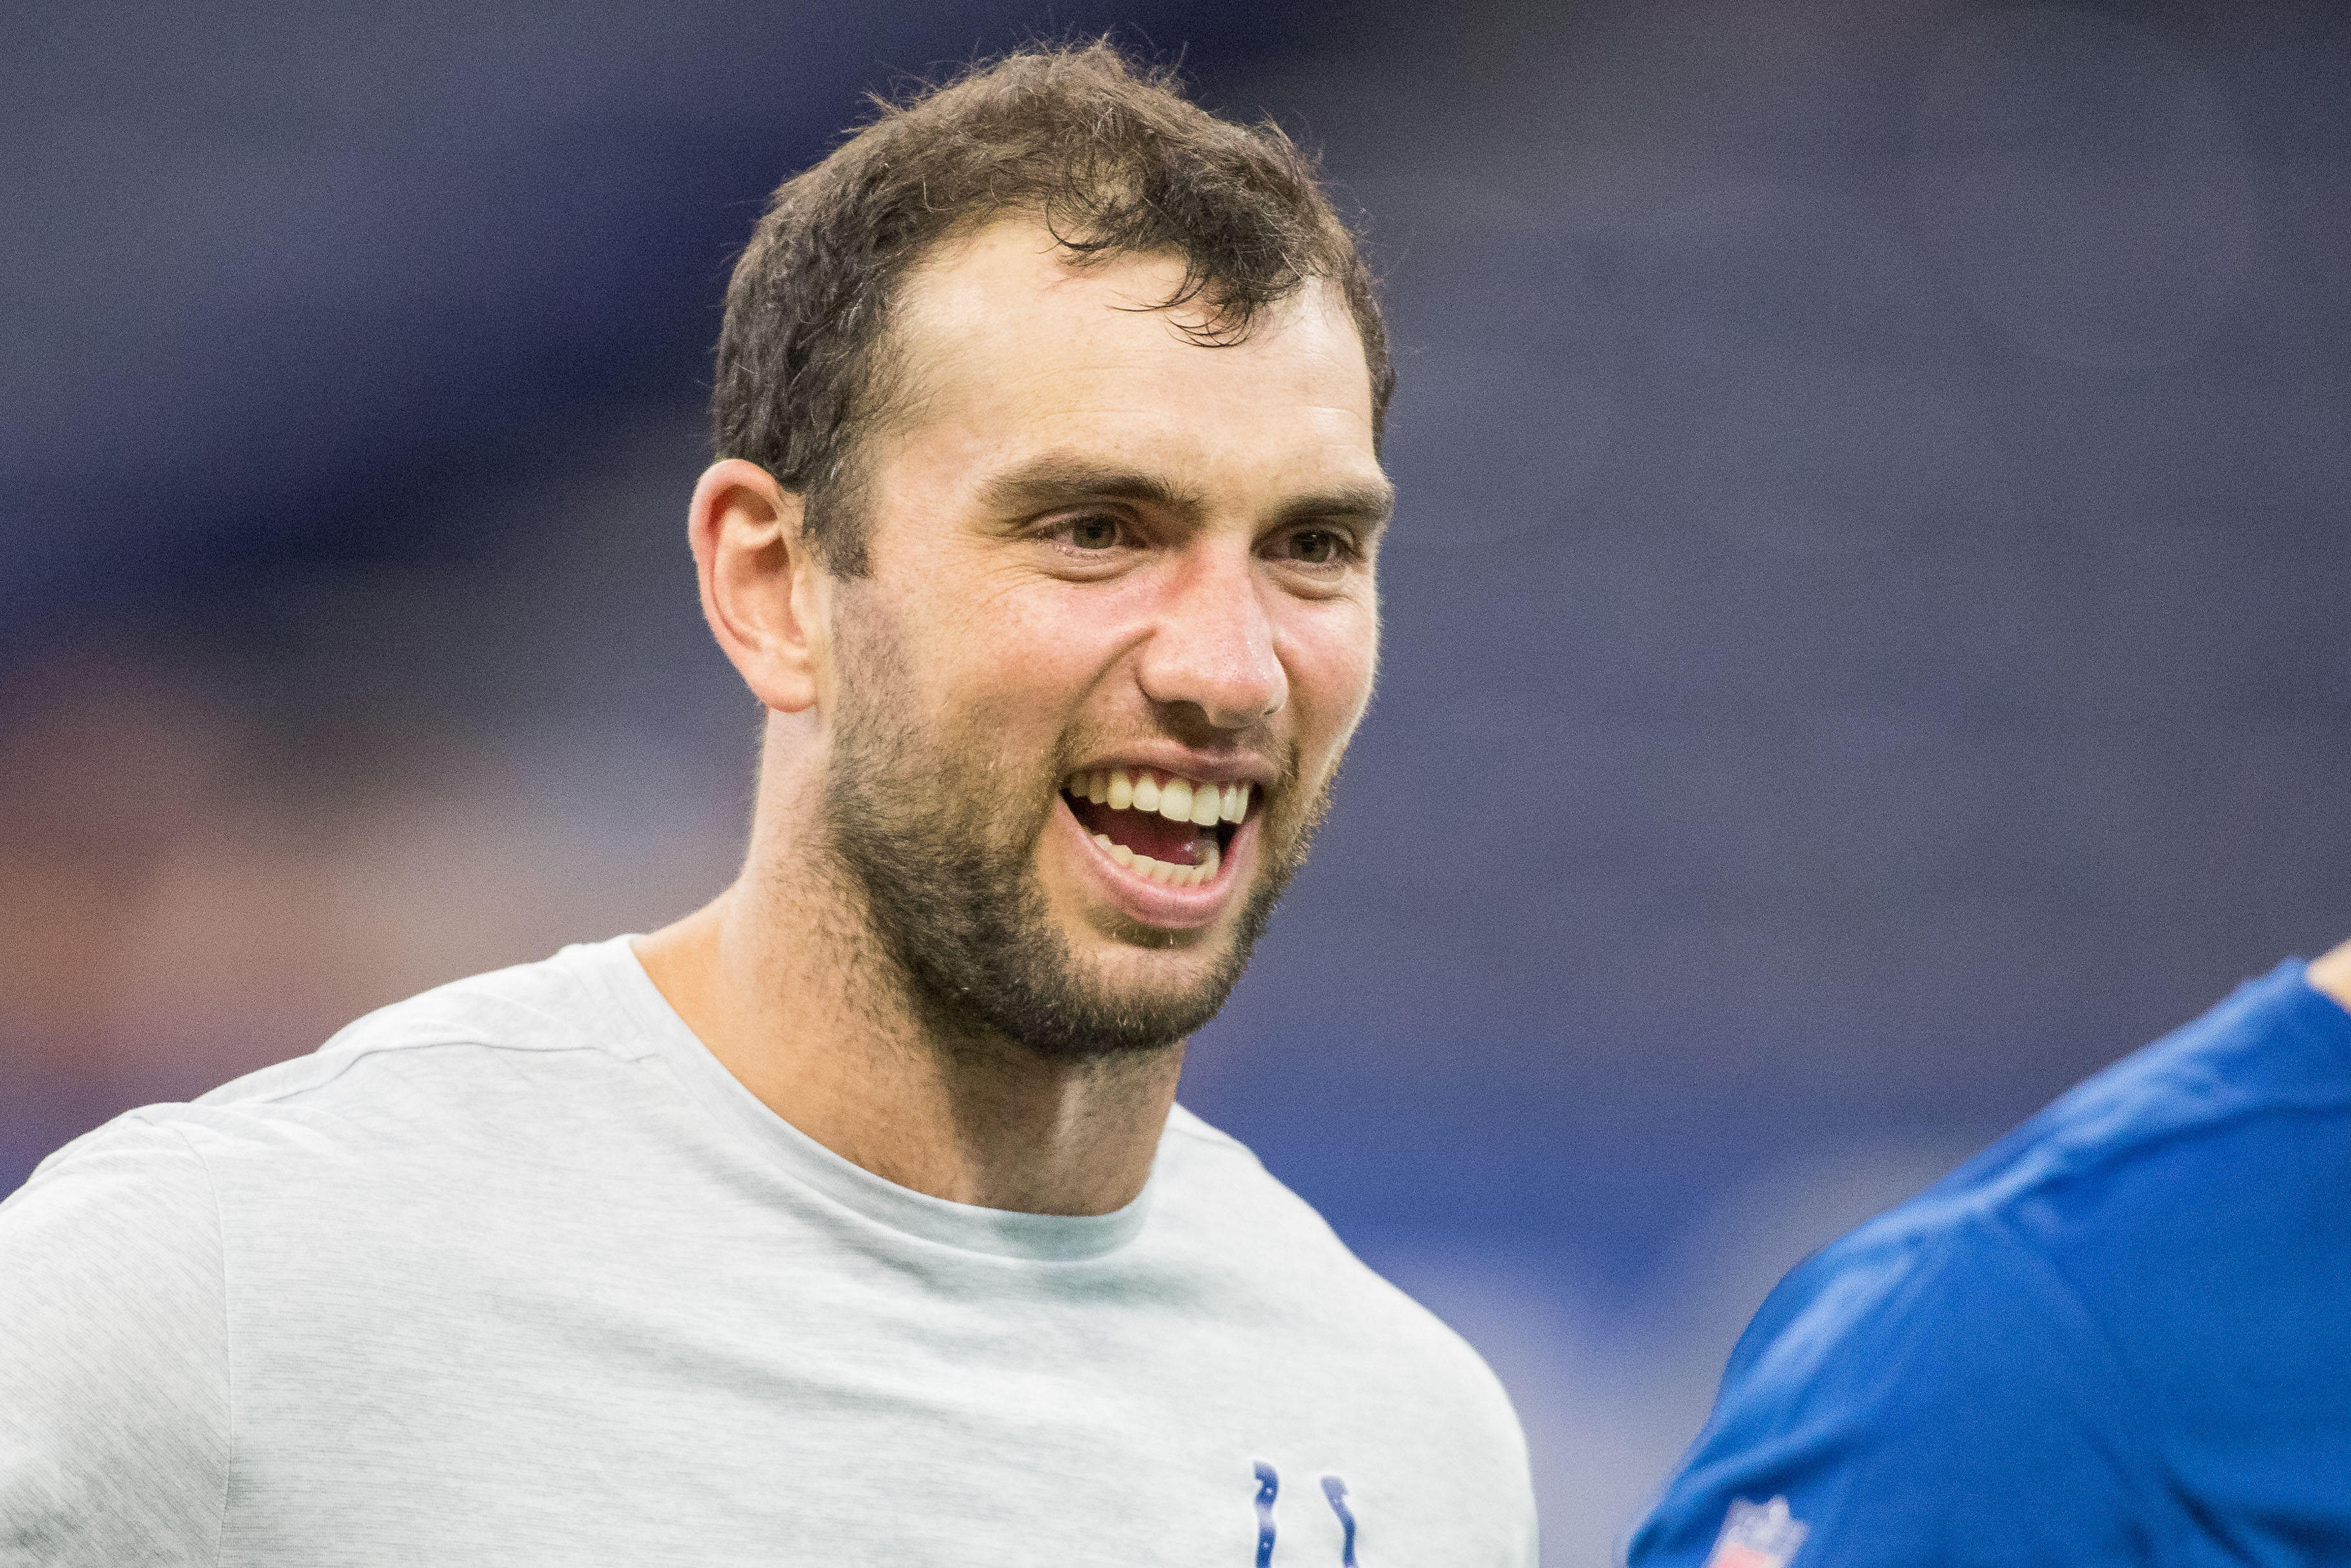 Former Indianapolis Colts quarterback Andrew Luck